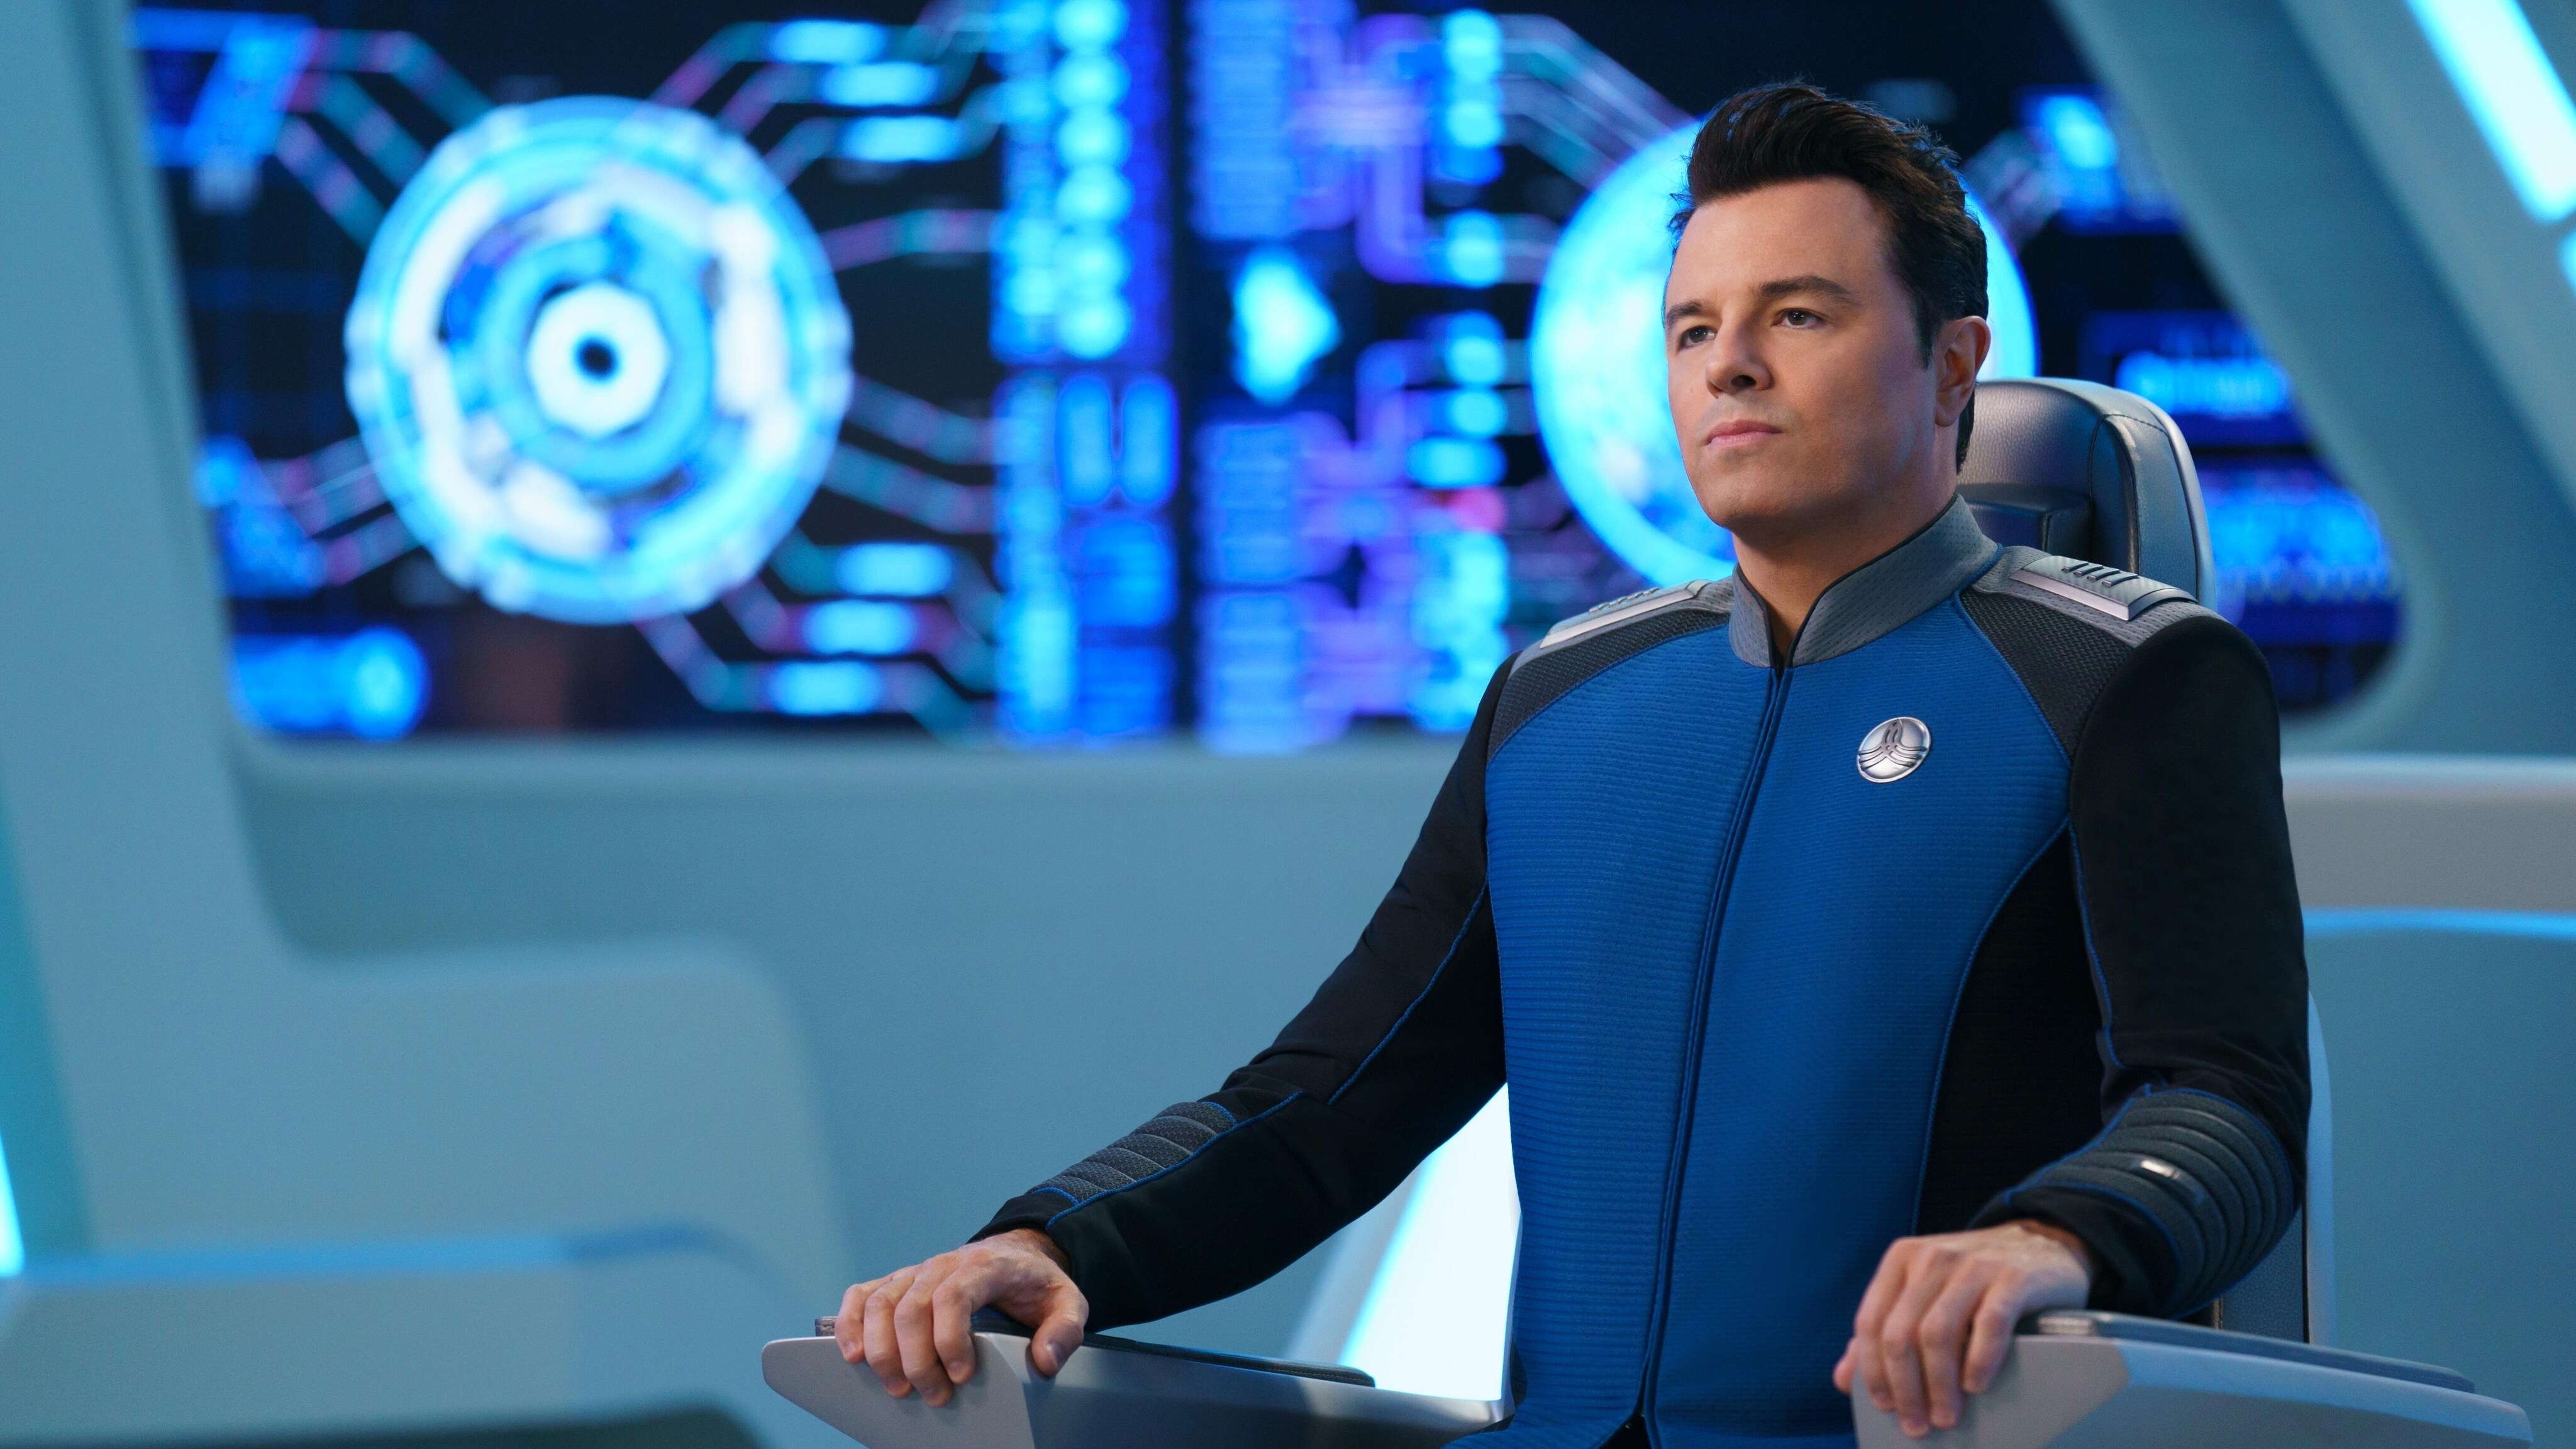 The Orville: New Horizons -- “Electric Sheep” - Episode 301 - The Orville crew deals with the interpersonal aftermath of the battle against the Kaylon on the season three premiere of “The Orville: New Horizons”. Capt. Ed Mercer (Seth MacFarlane), shown. (Photo by: Ali Goldstein/Hulu)